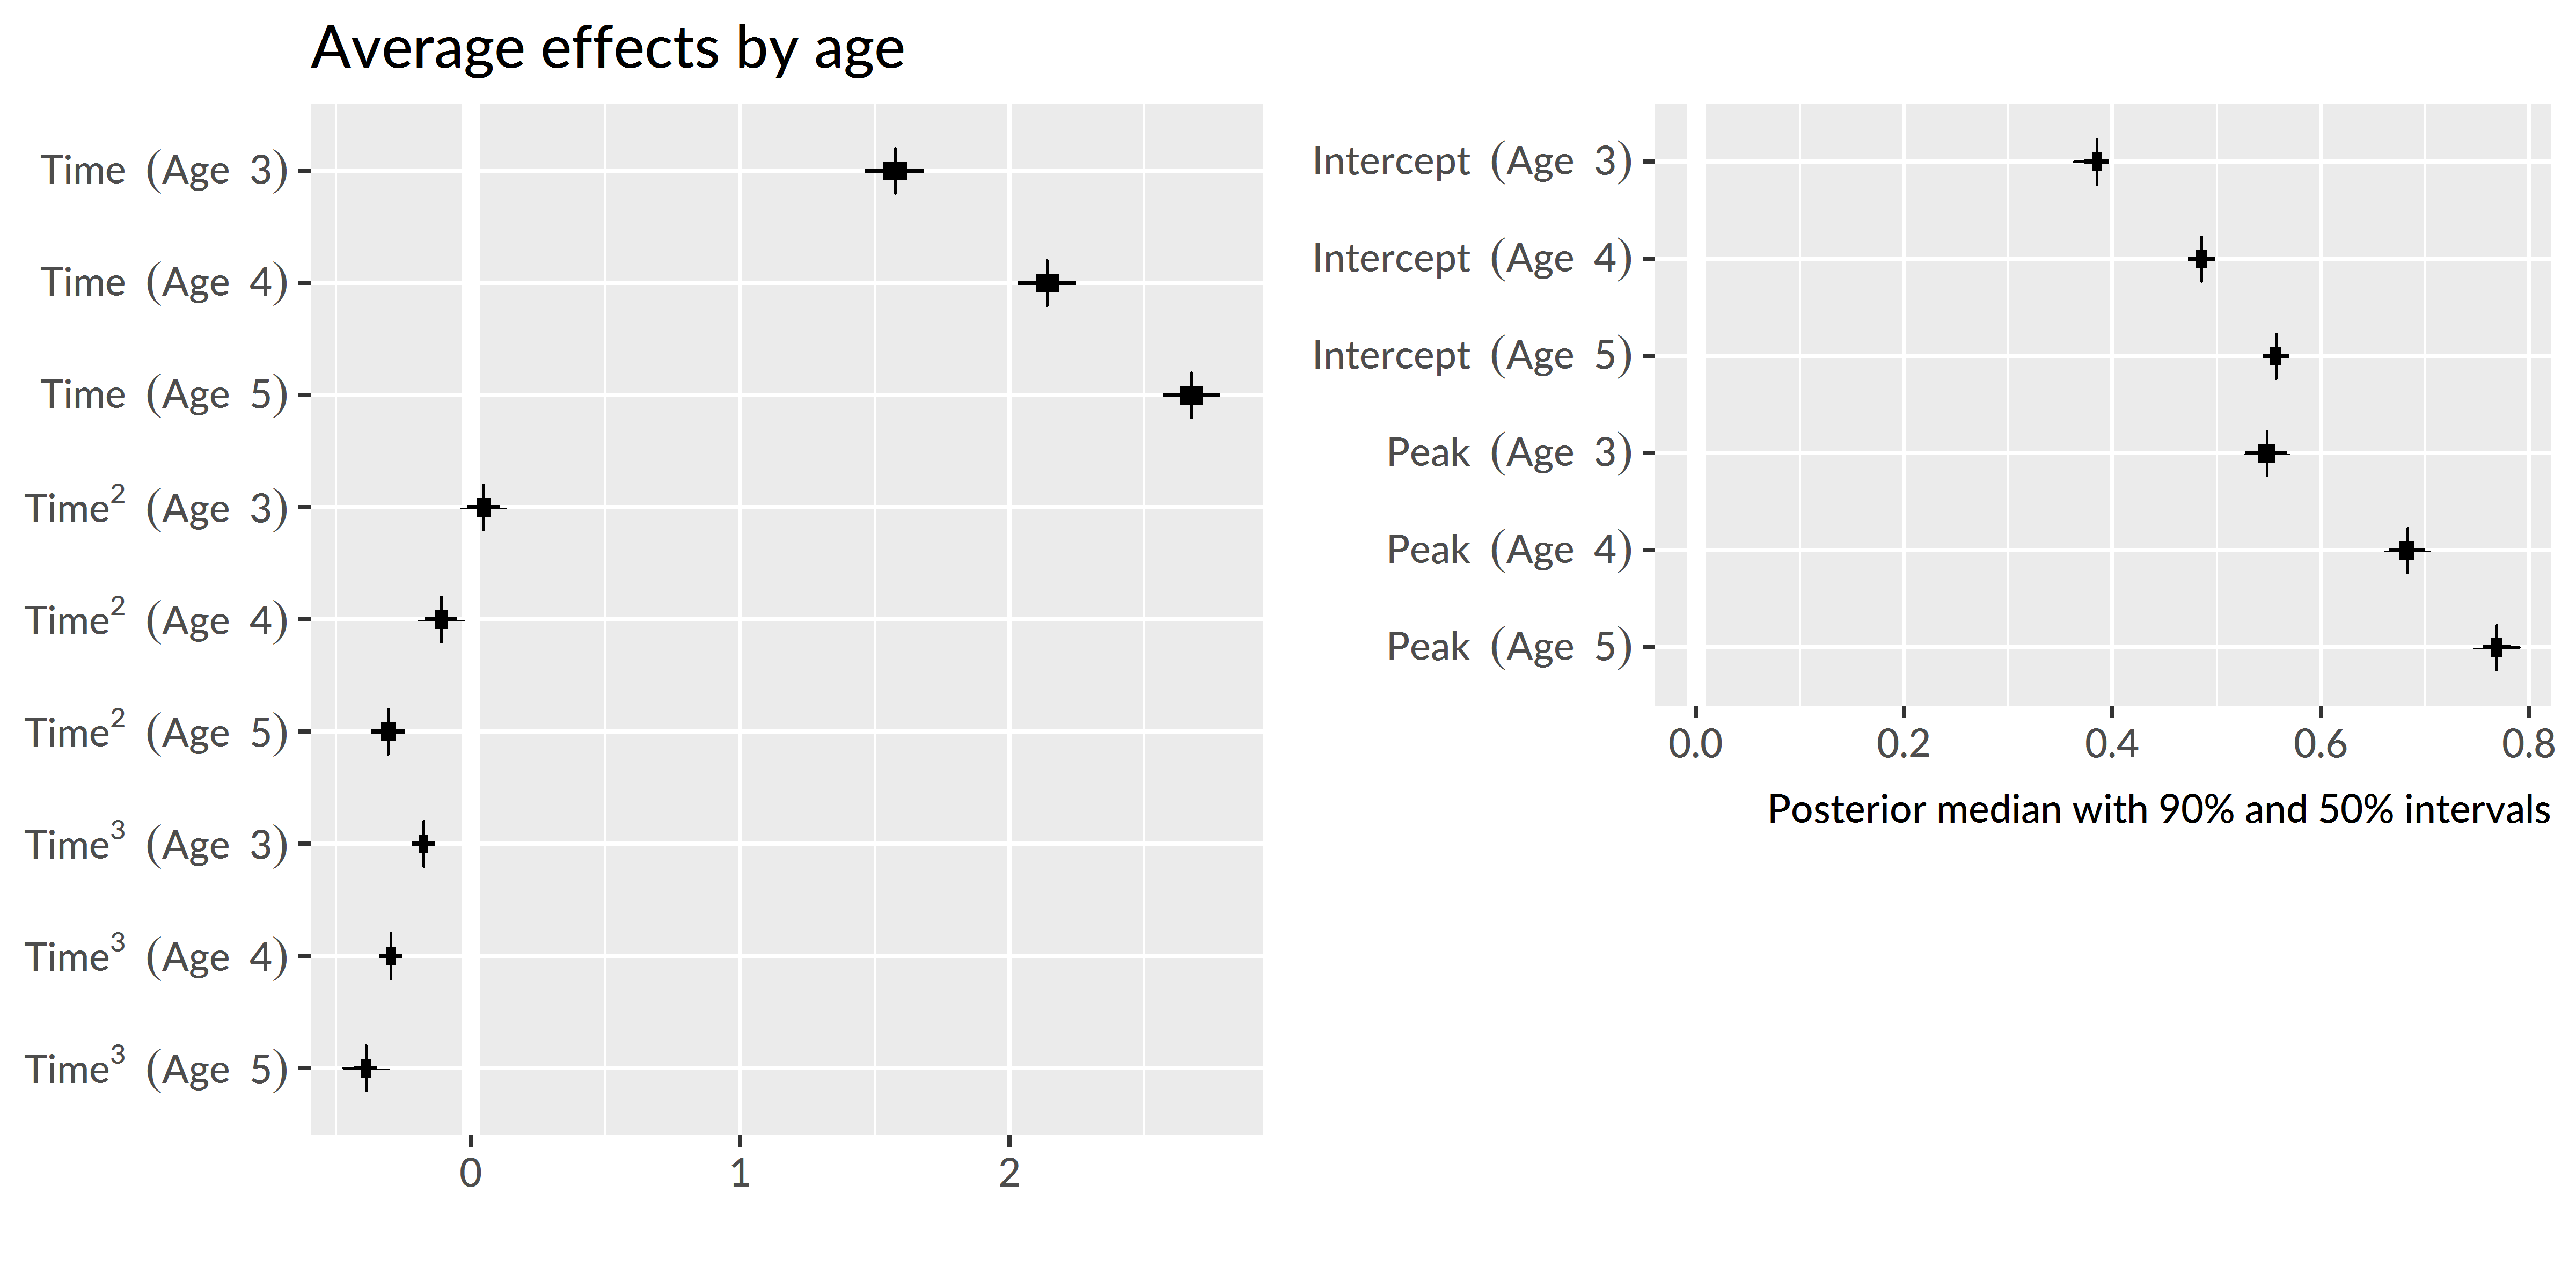 Uncertainty intervals for growth curve features at each age. The intercept and peak features were converted from log-odds to proportions to ease interpretation.